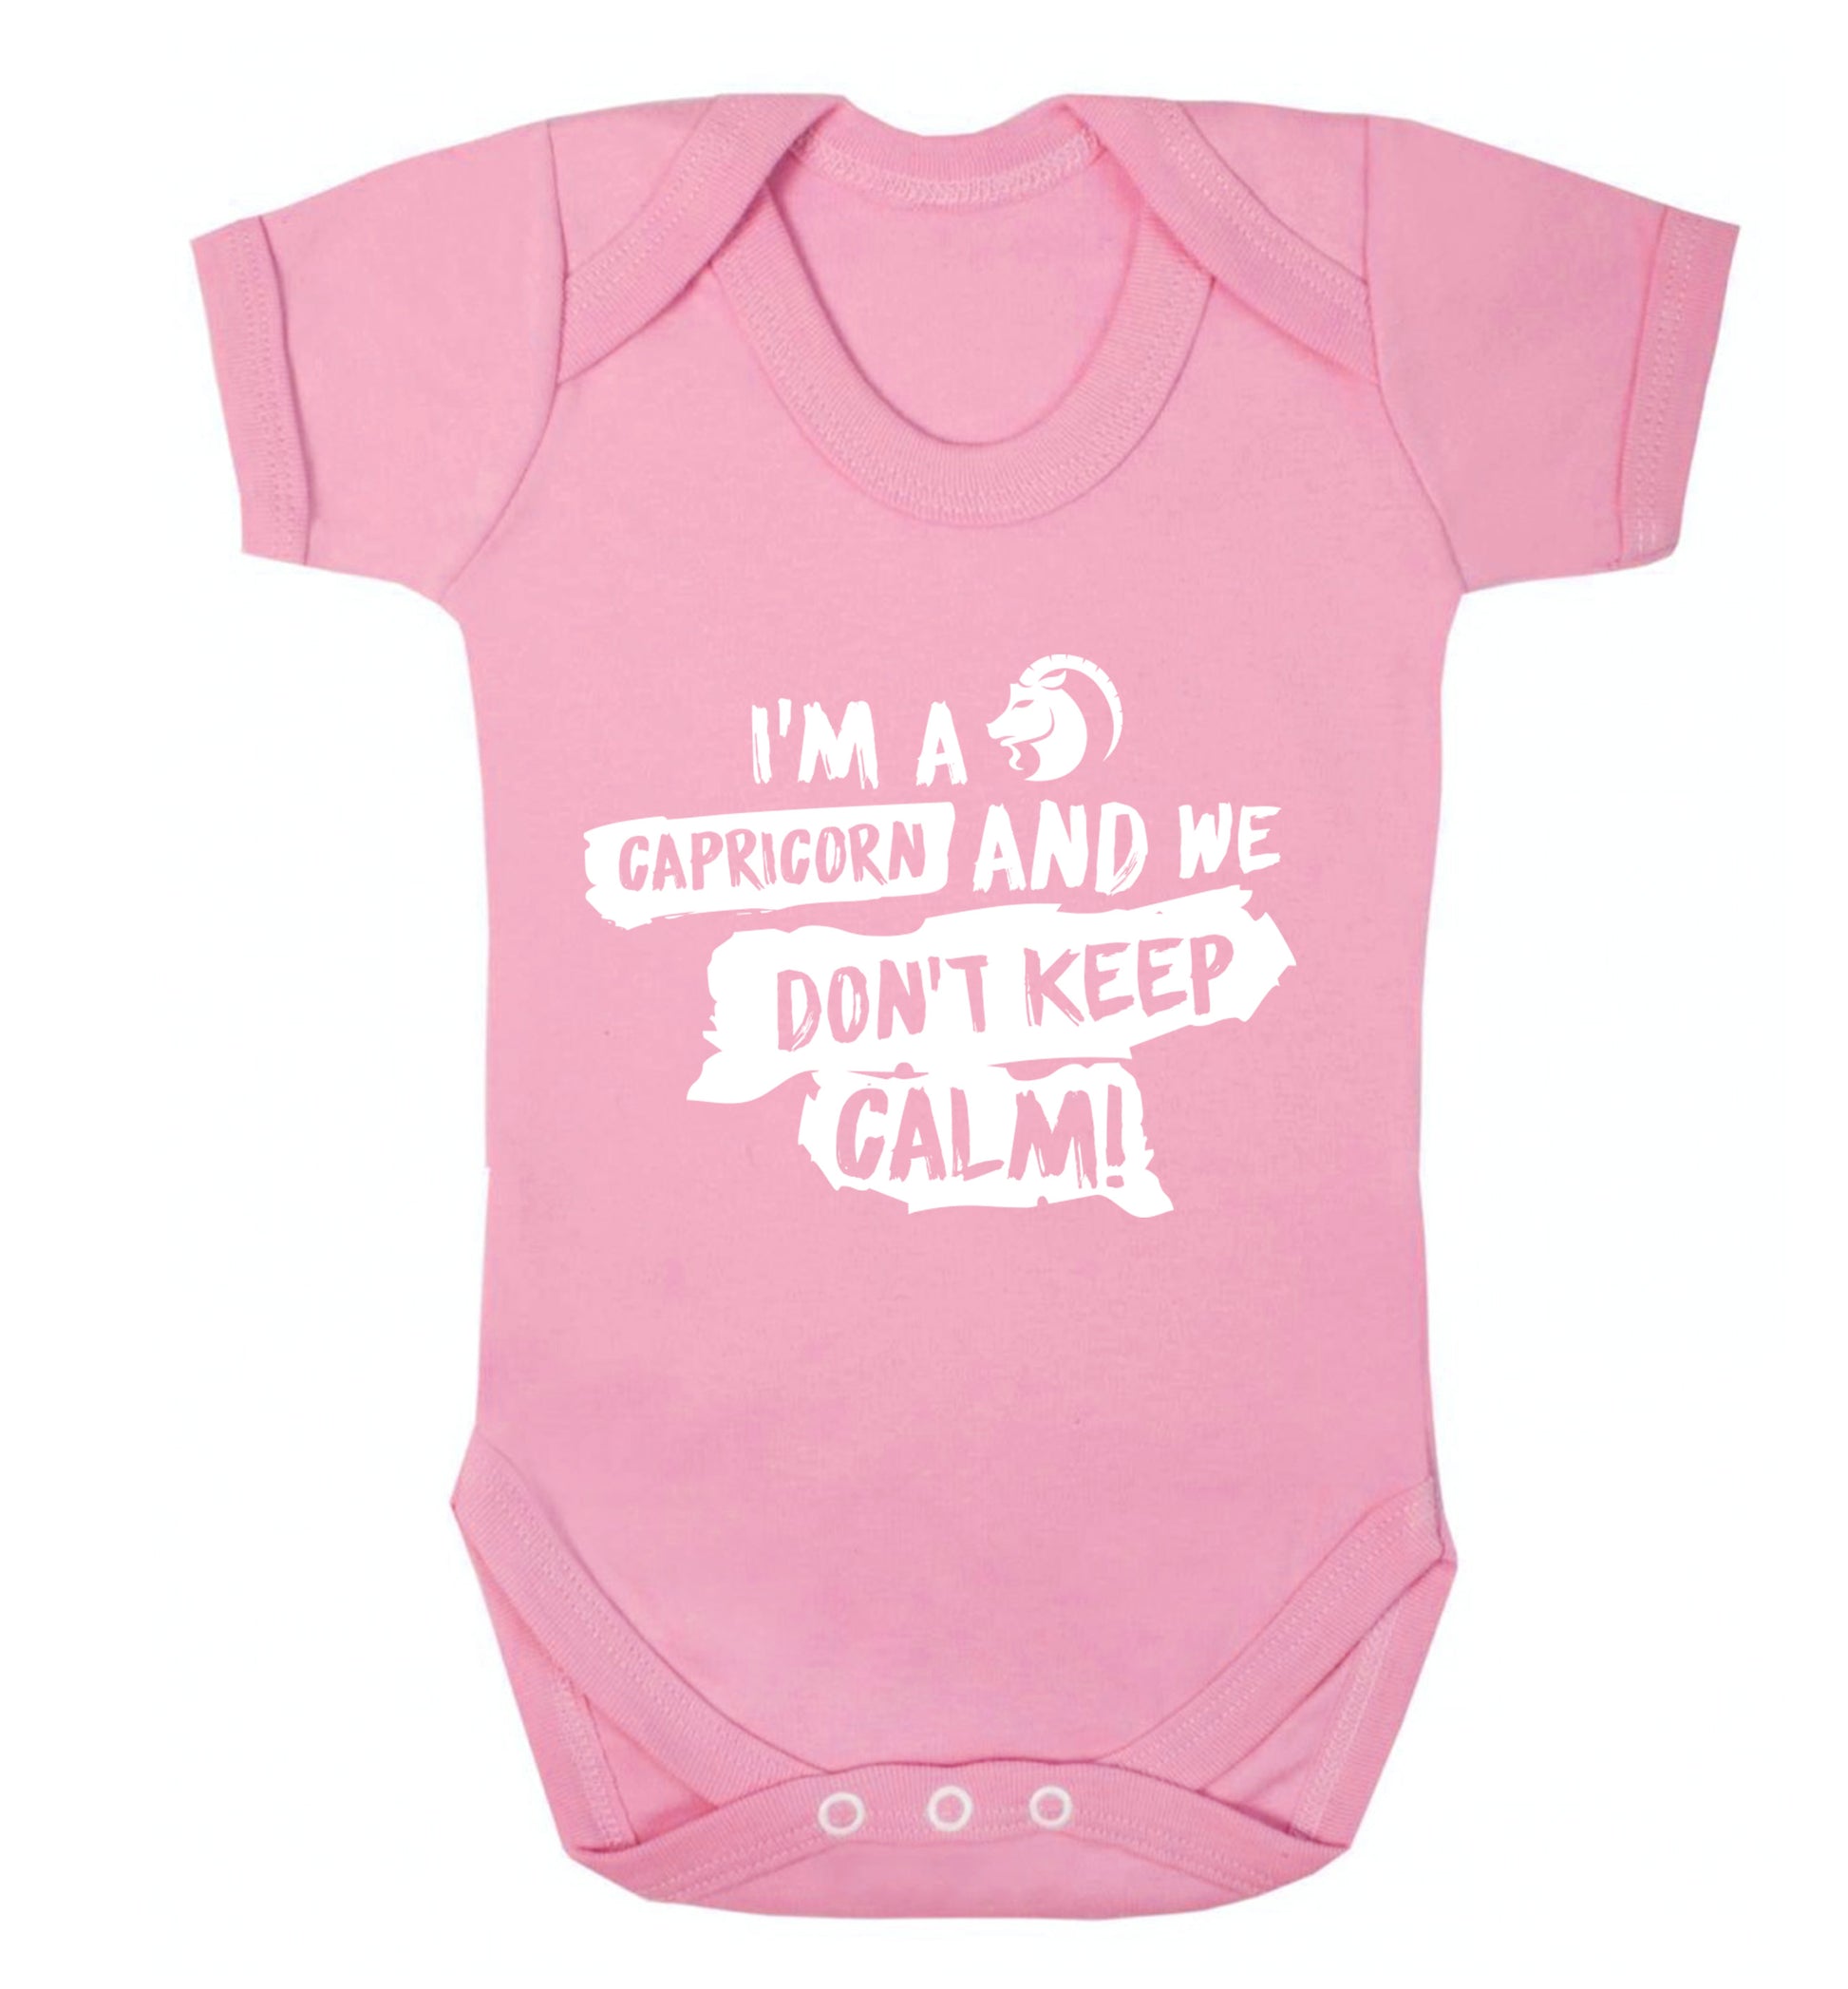 I'm a capricorn and we don't keep calm Baby Vest pale pink 18-24 months